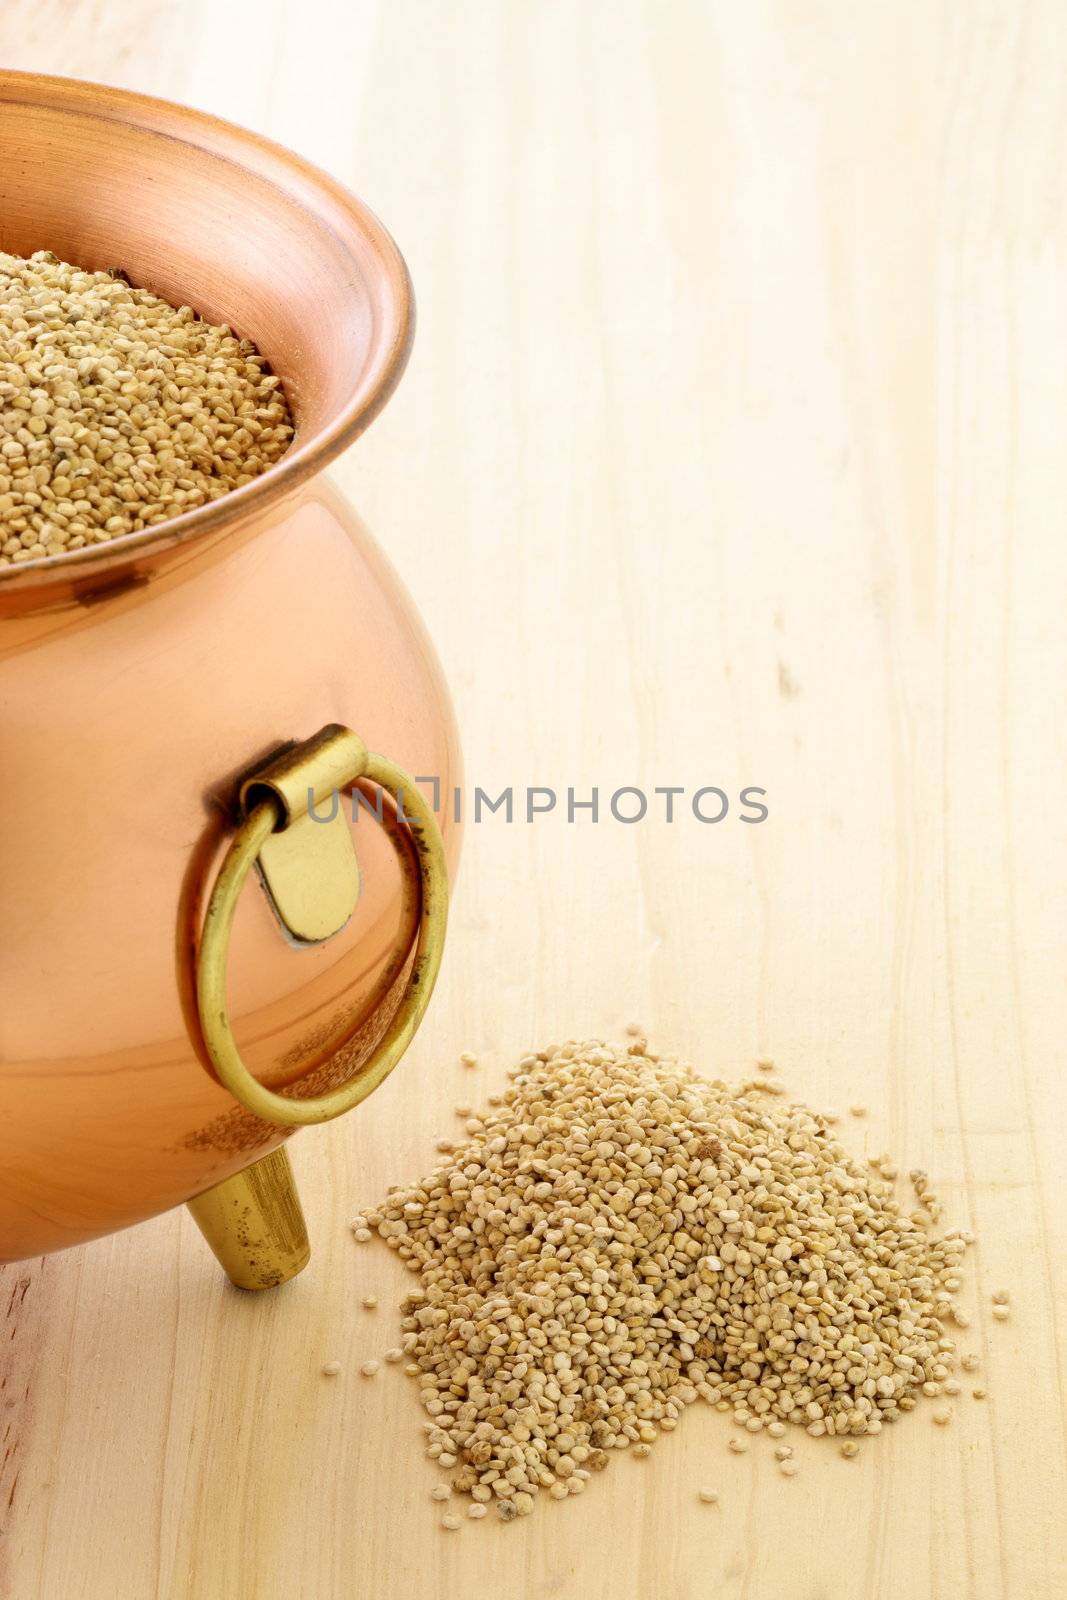 raw quinoa having the most complete proteins of any grain, it is also a great source of vitamins and minerals.